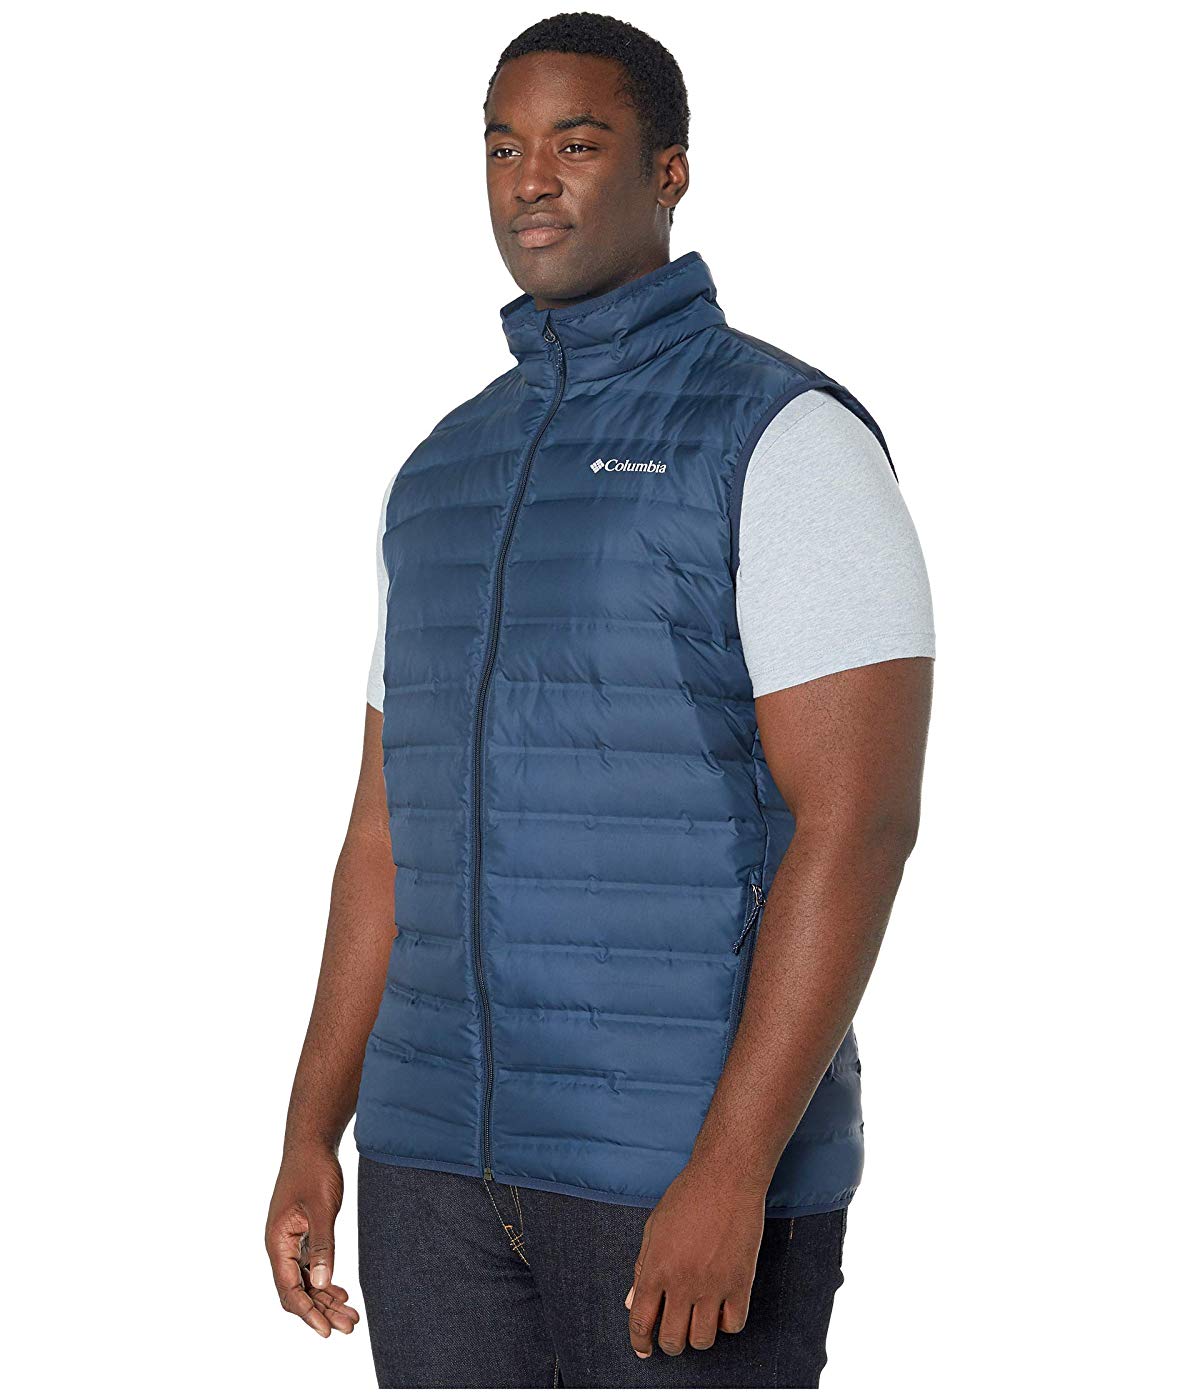 Columbia Big & Tall Lake 22 Down Vest Collegiate Navy - image 1 of 4